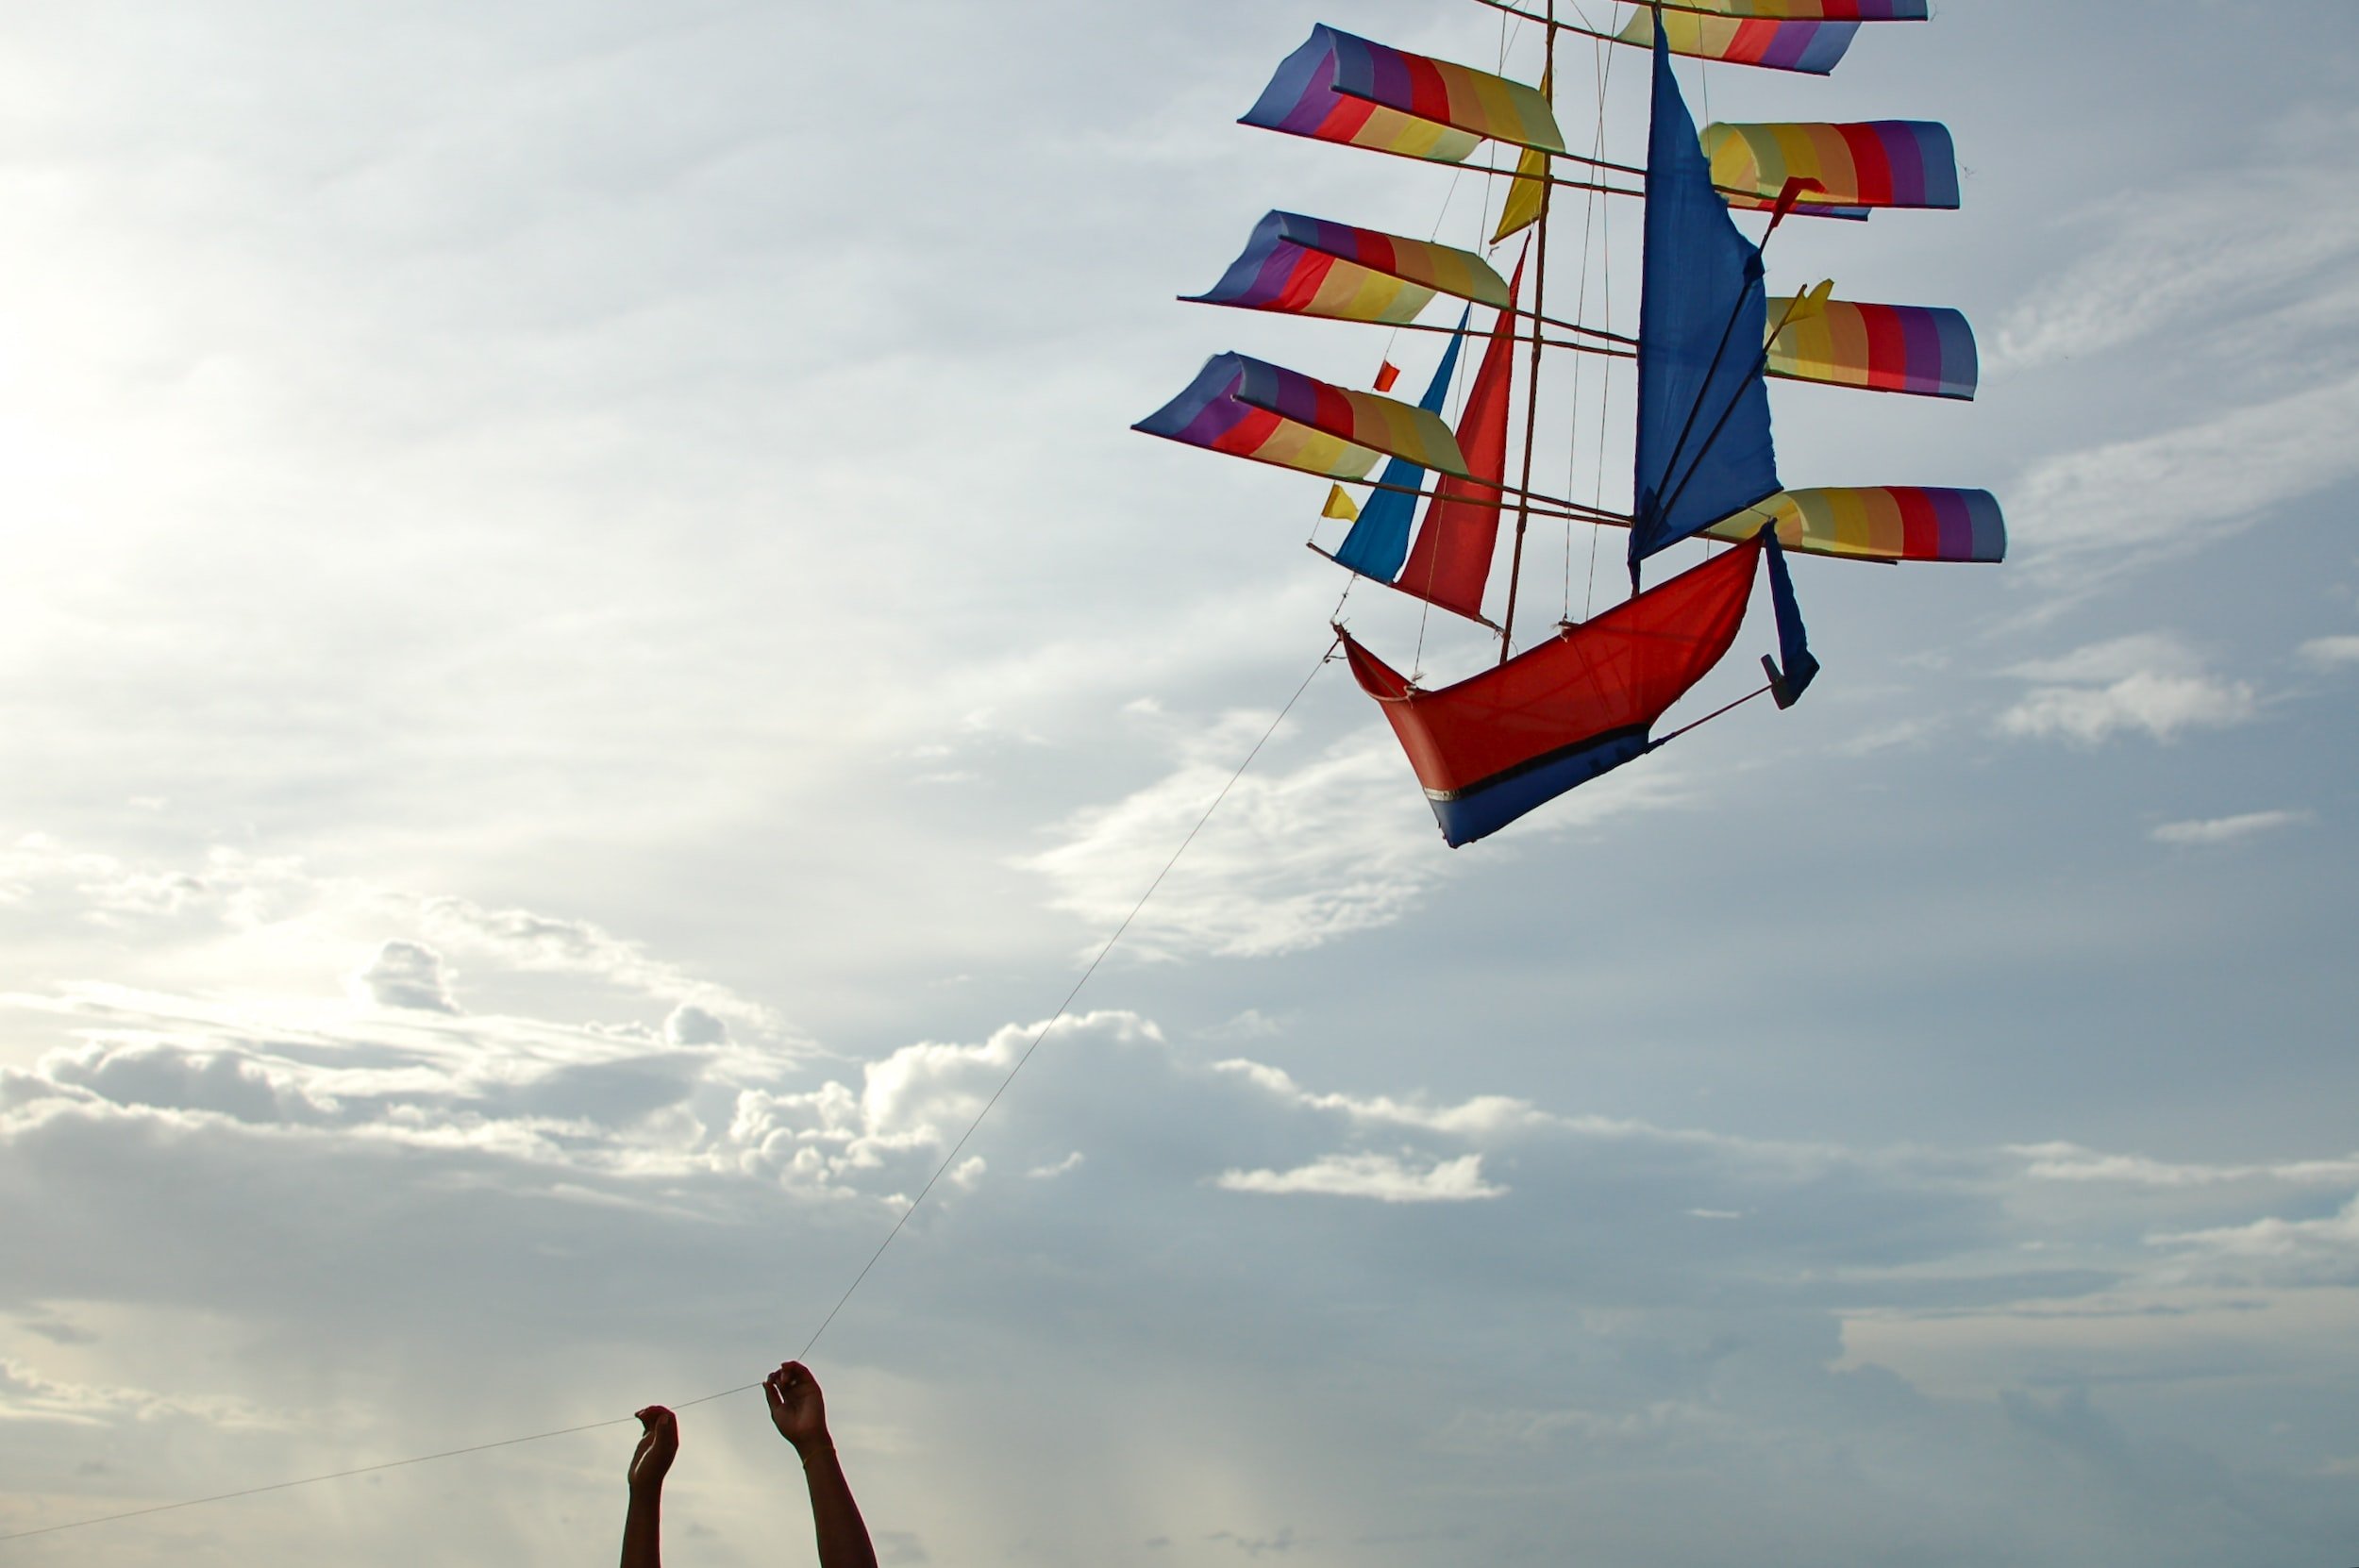 What is the best month to fly a kite on Bali?